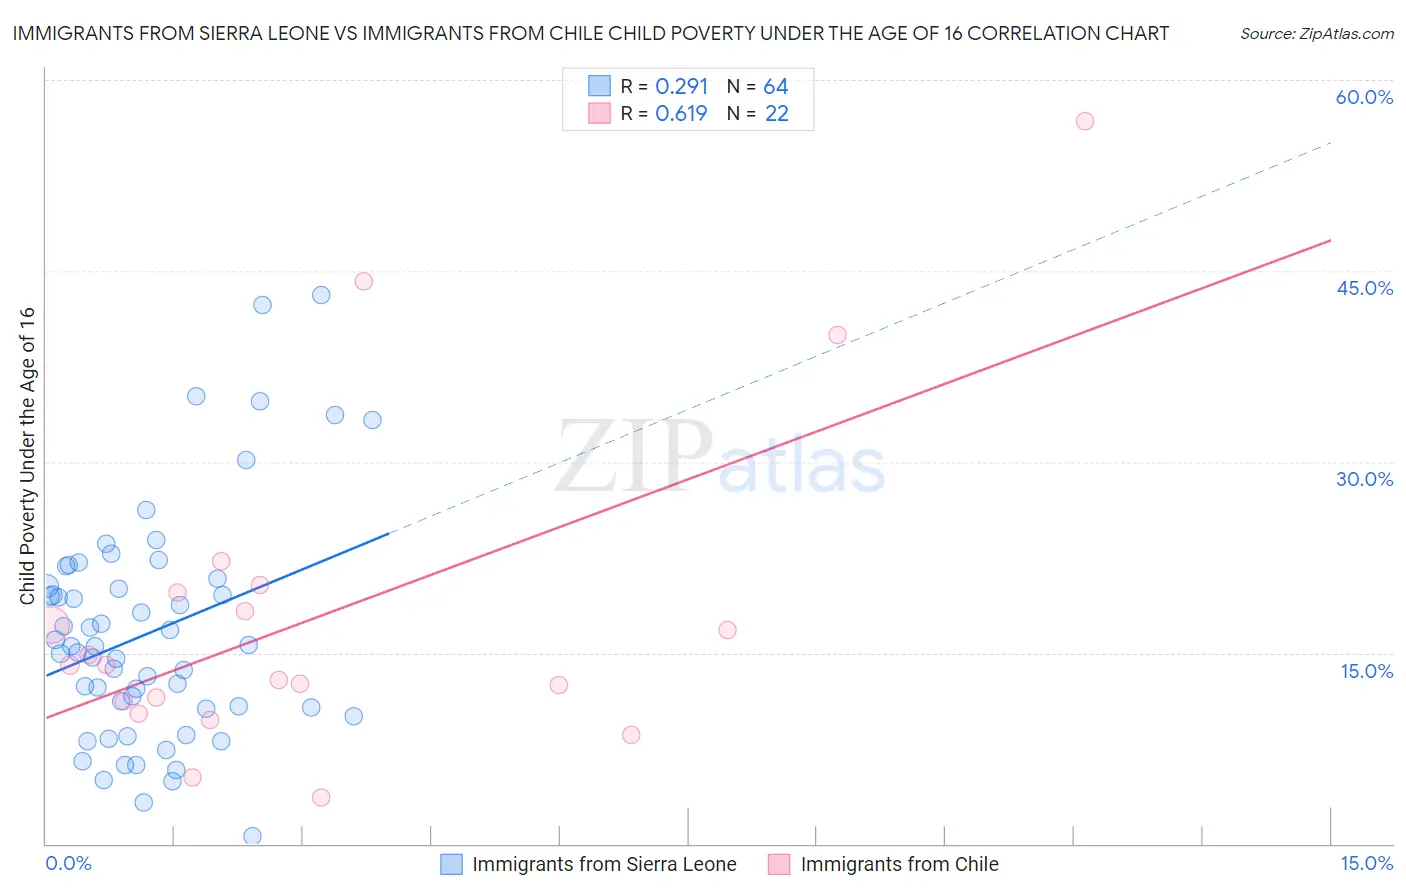 Immigrants from Sierra Leone vs Immigrants from Chile Child Poverty Under the Age of 16